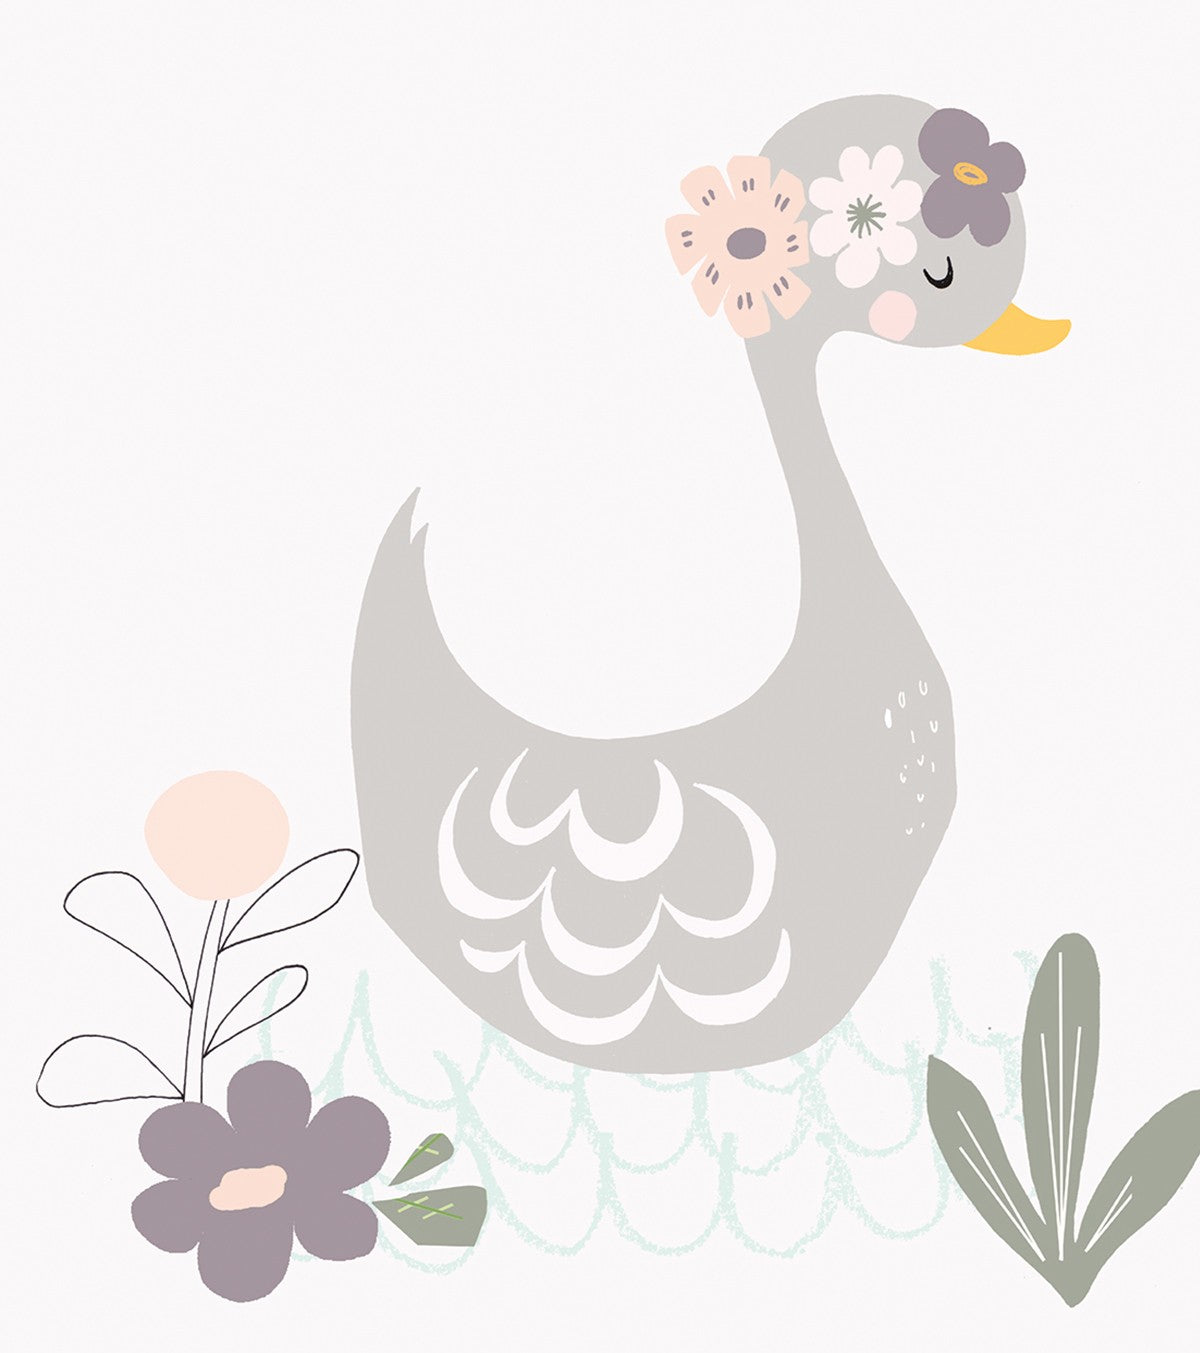 MY LOVELY SWAN - Children's poster - Swan and flowers